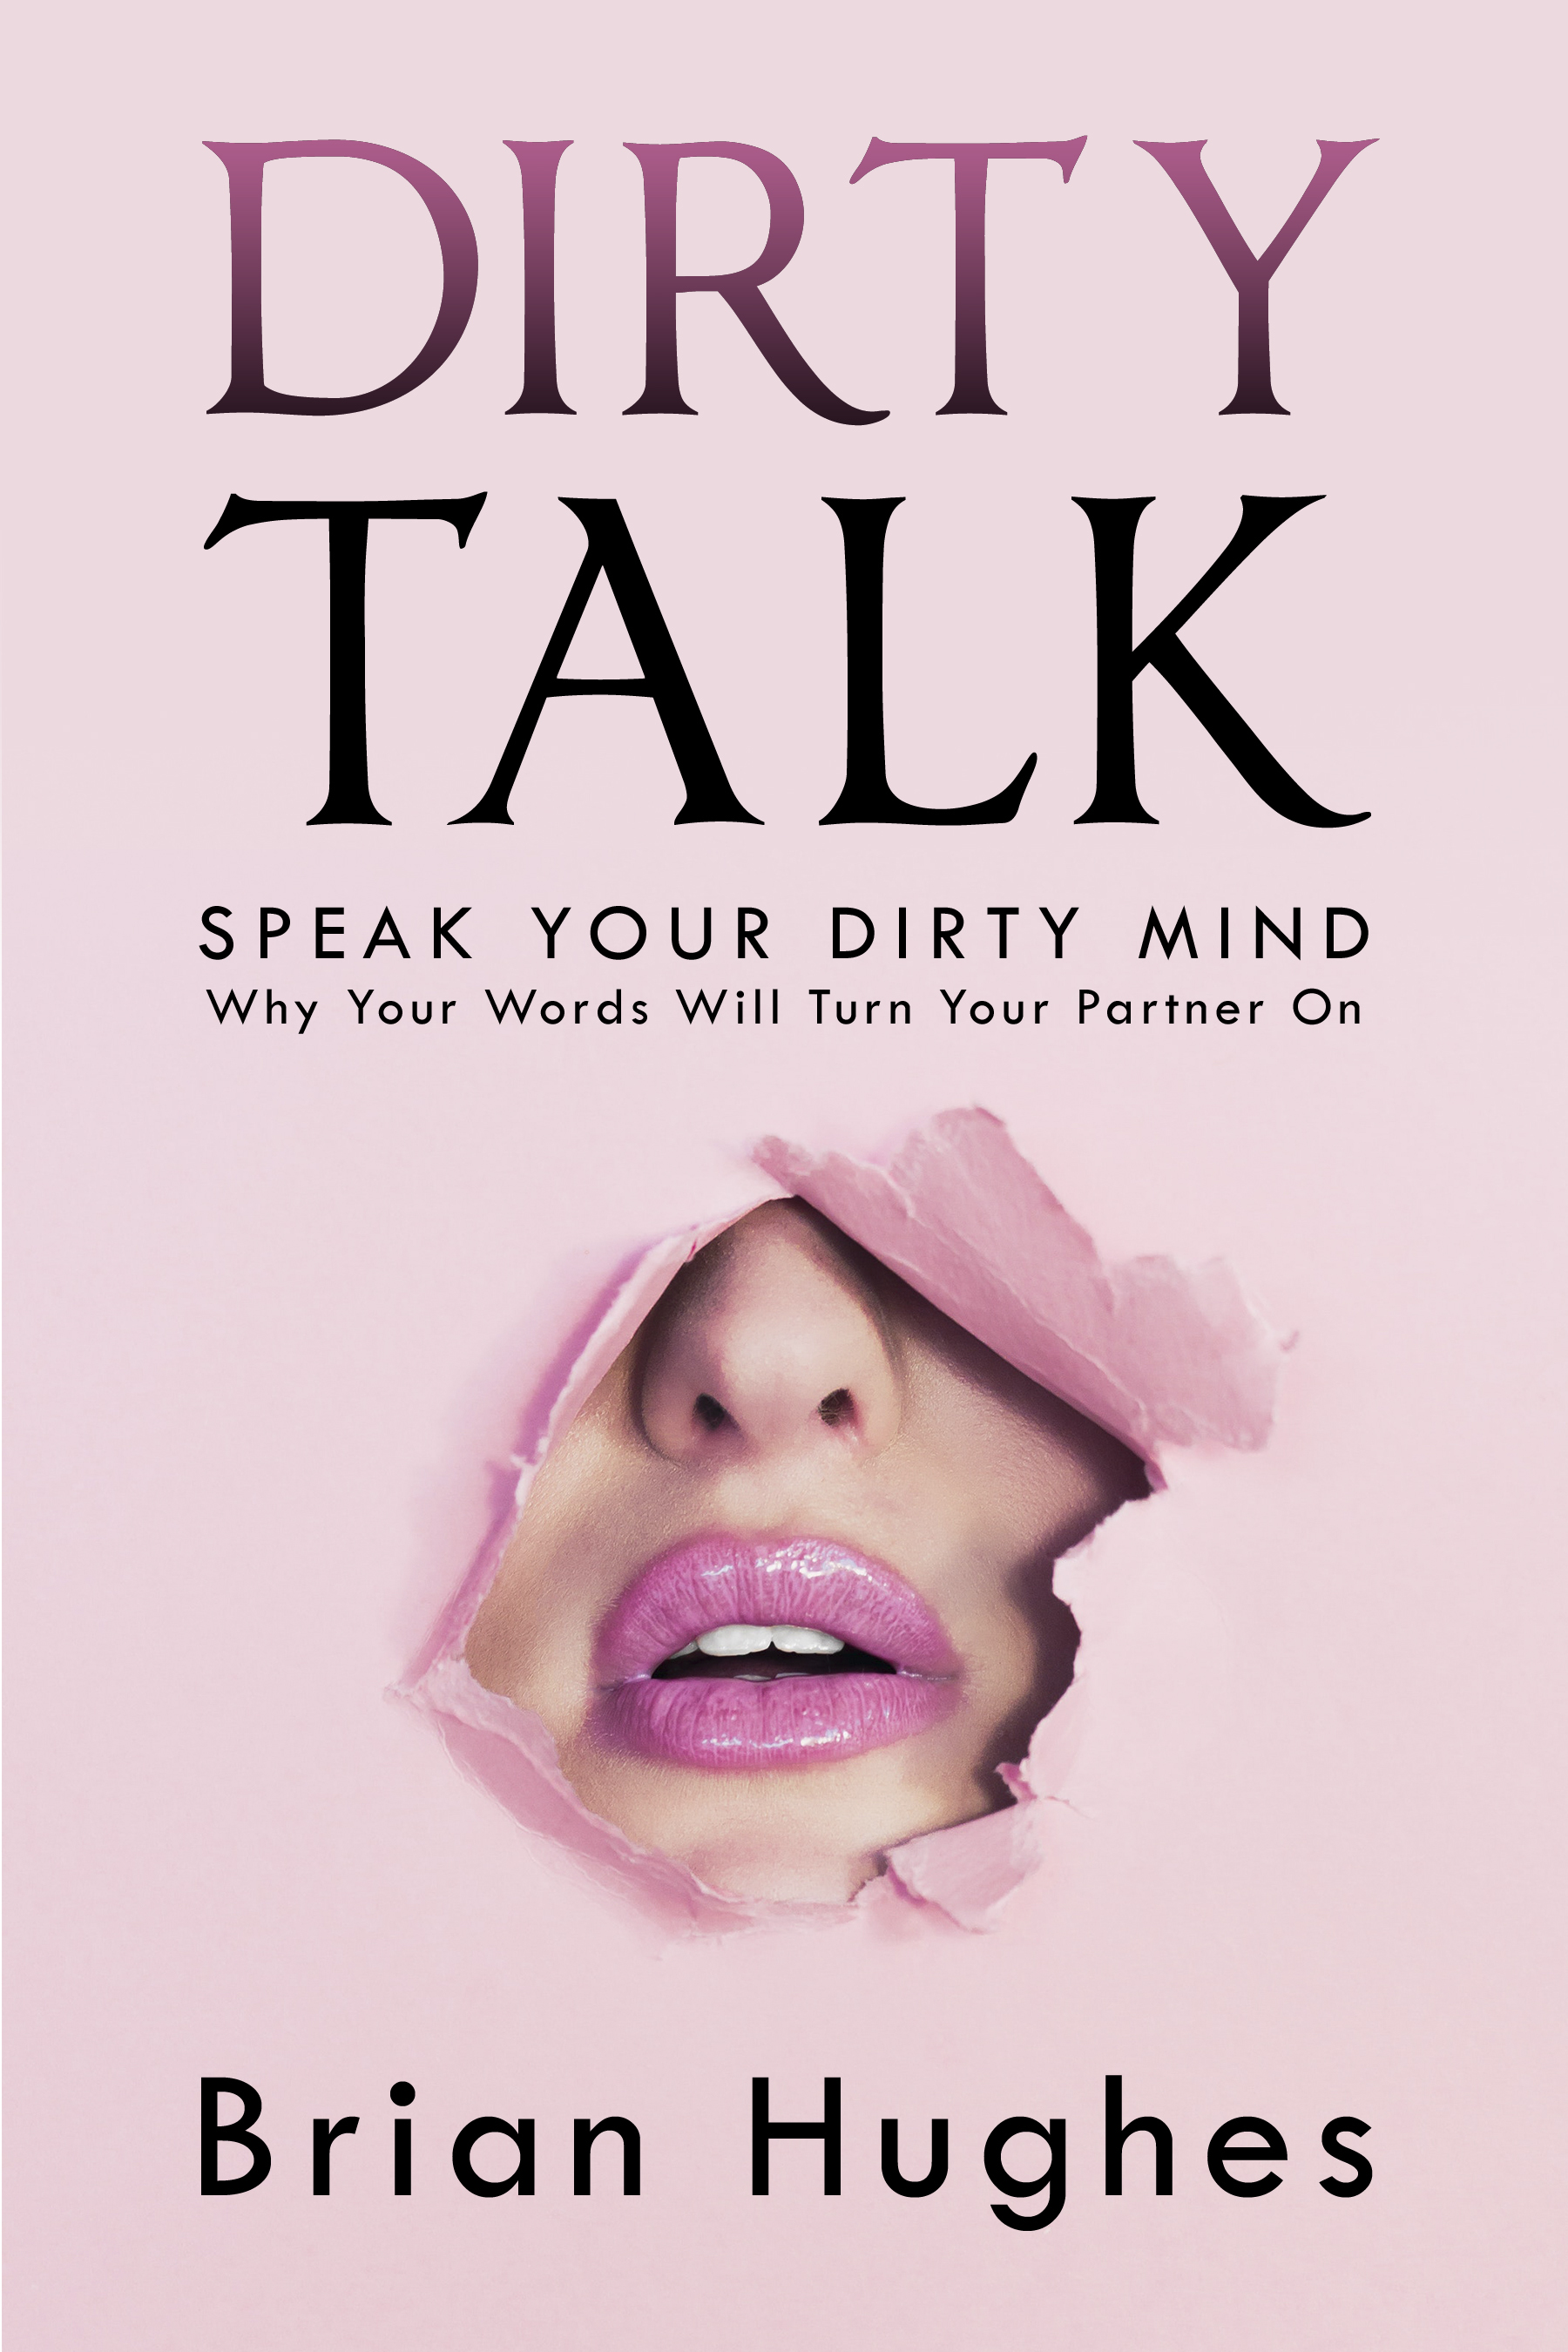 FREE: Dirty Talk: Speak Your Dirty Mind! Why Your Words Will Turn Your Partner On by Brian Hughes